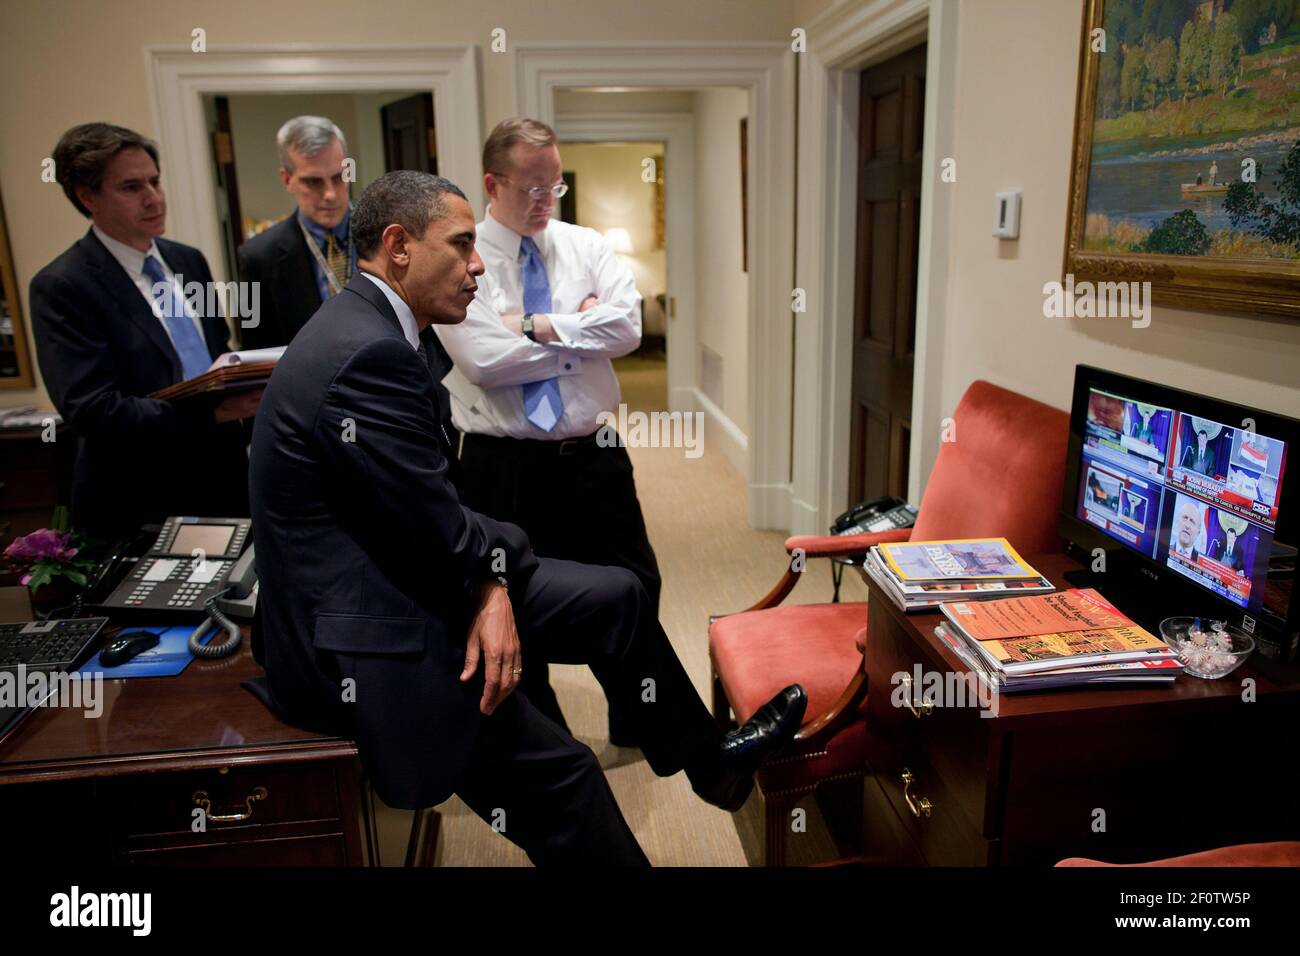 President Barack Obama watches a televised speech by President Hosni Mubarak of Egypt in the Outer Oval Office Jan. 28 2011. With the President from left are: Tony Blinken National Security Advisor to the Vice President; Deputy National Security Advisor Denis McDonough; and Press Secretary Robert Gibbs. Stock Photo